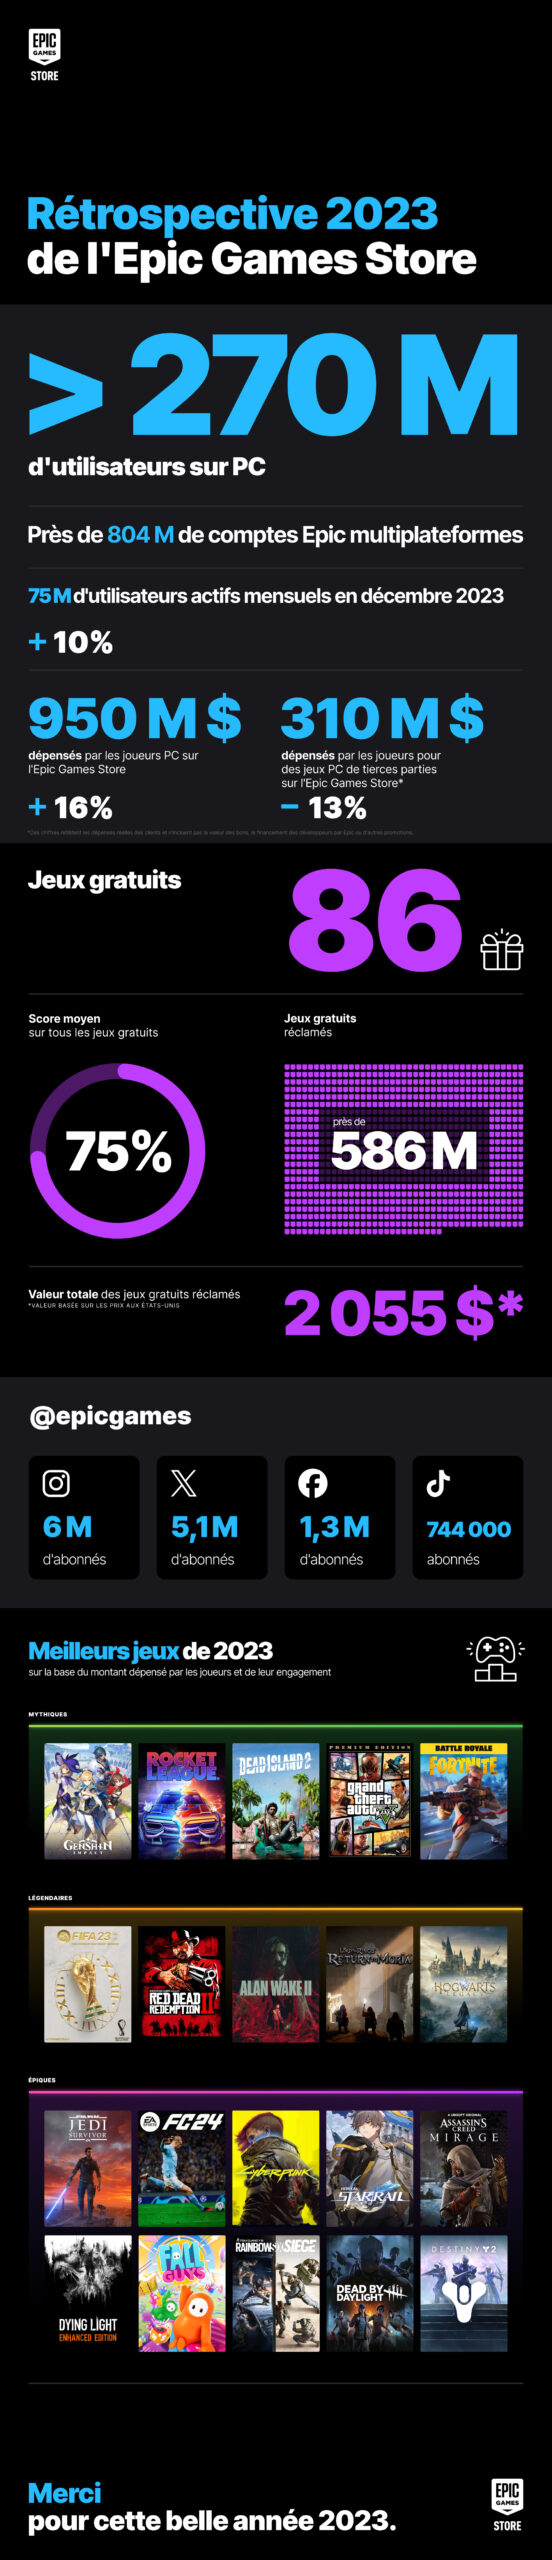 Epic Games Store Infographie 2023